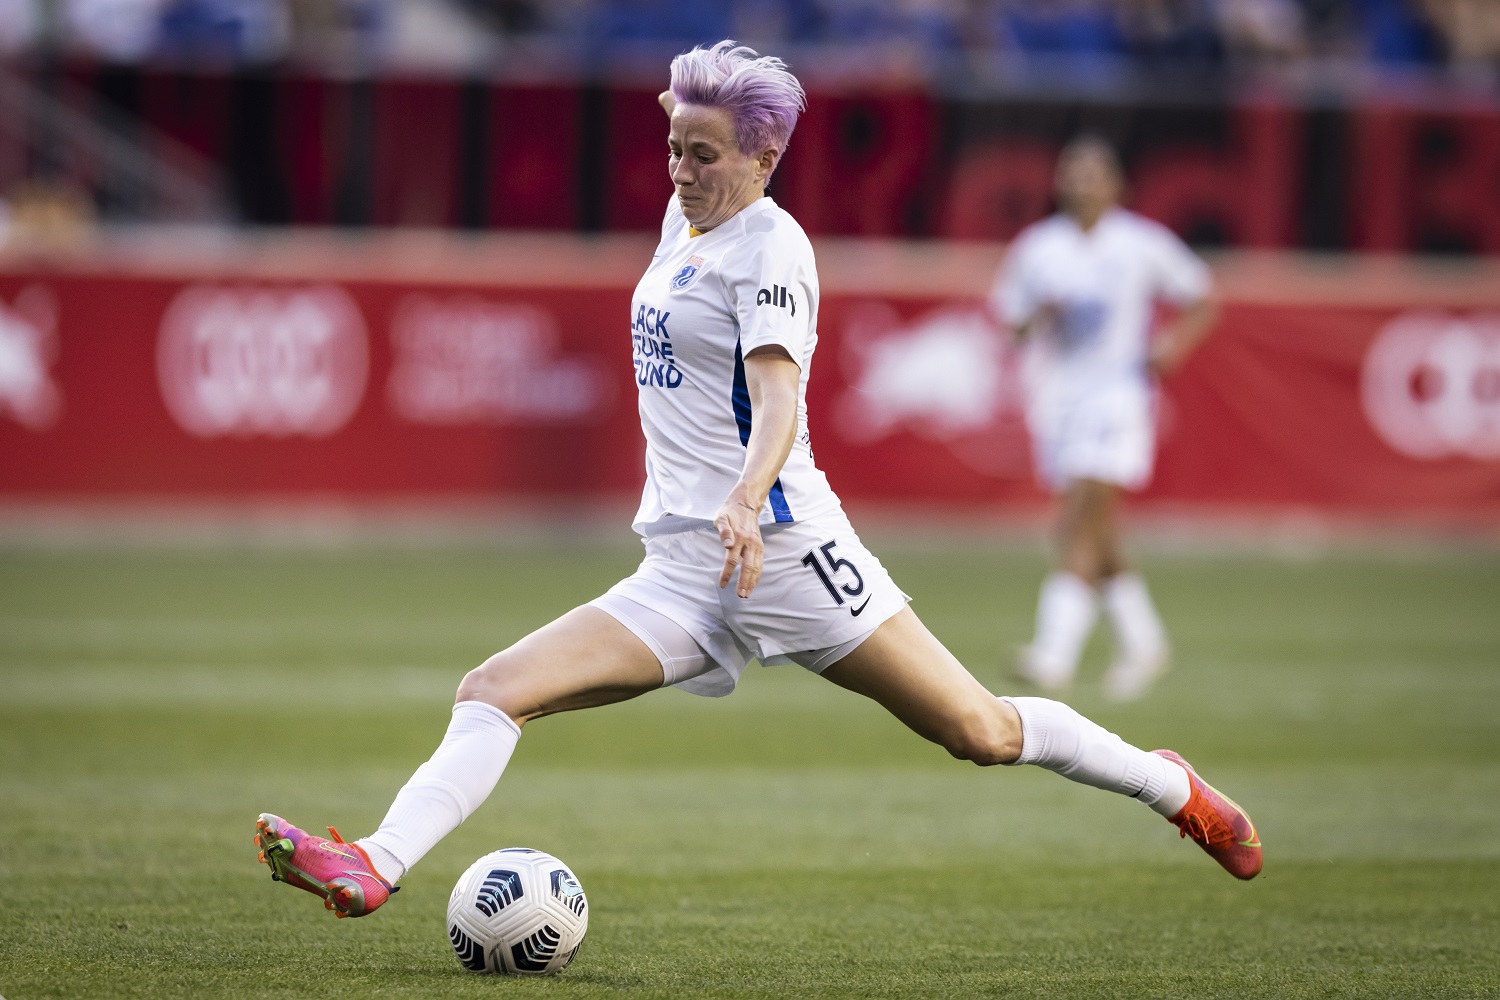 Megan Rapinoe shoots during a NWSL game on June 5, 2021.